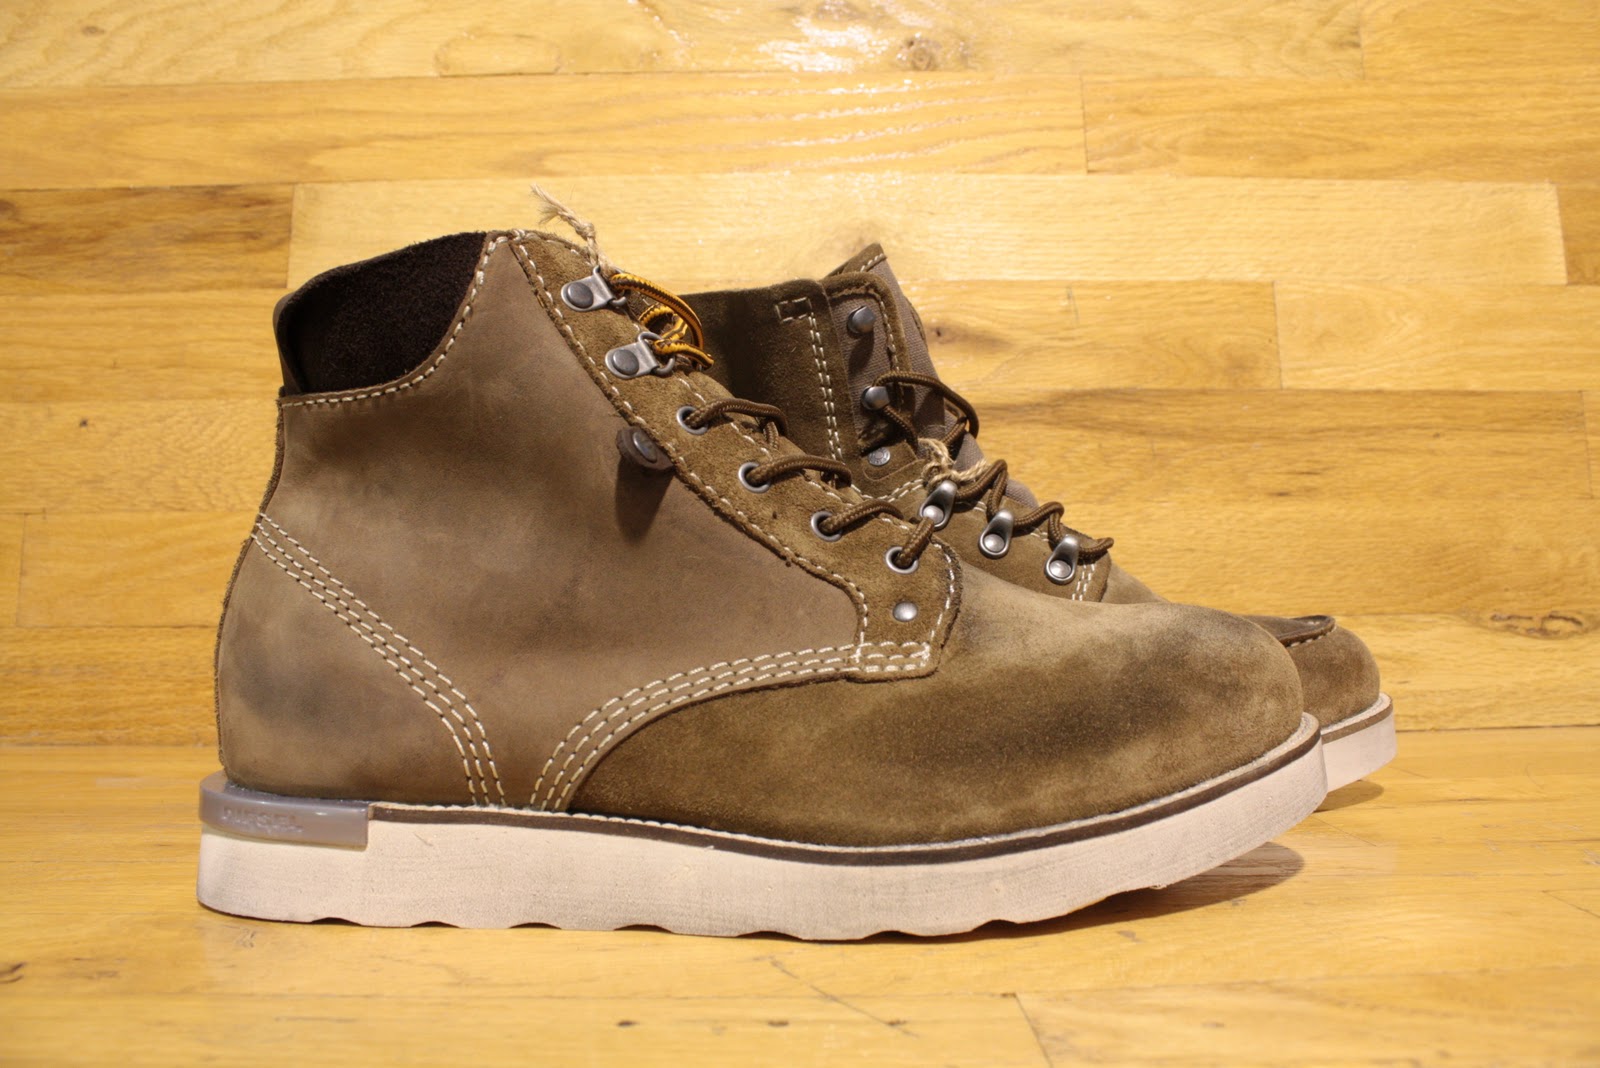 Dr. Jays Stores: New Diesel Suede Boots 